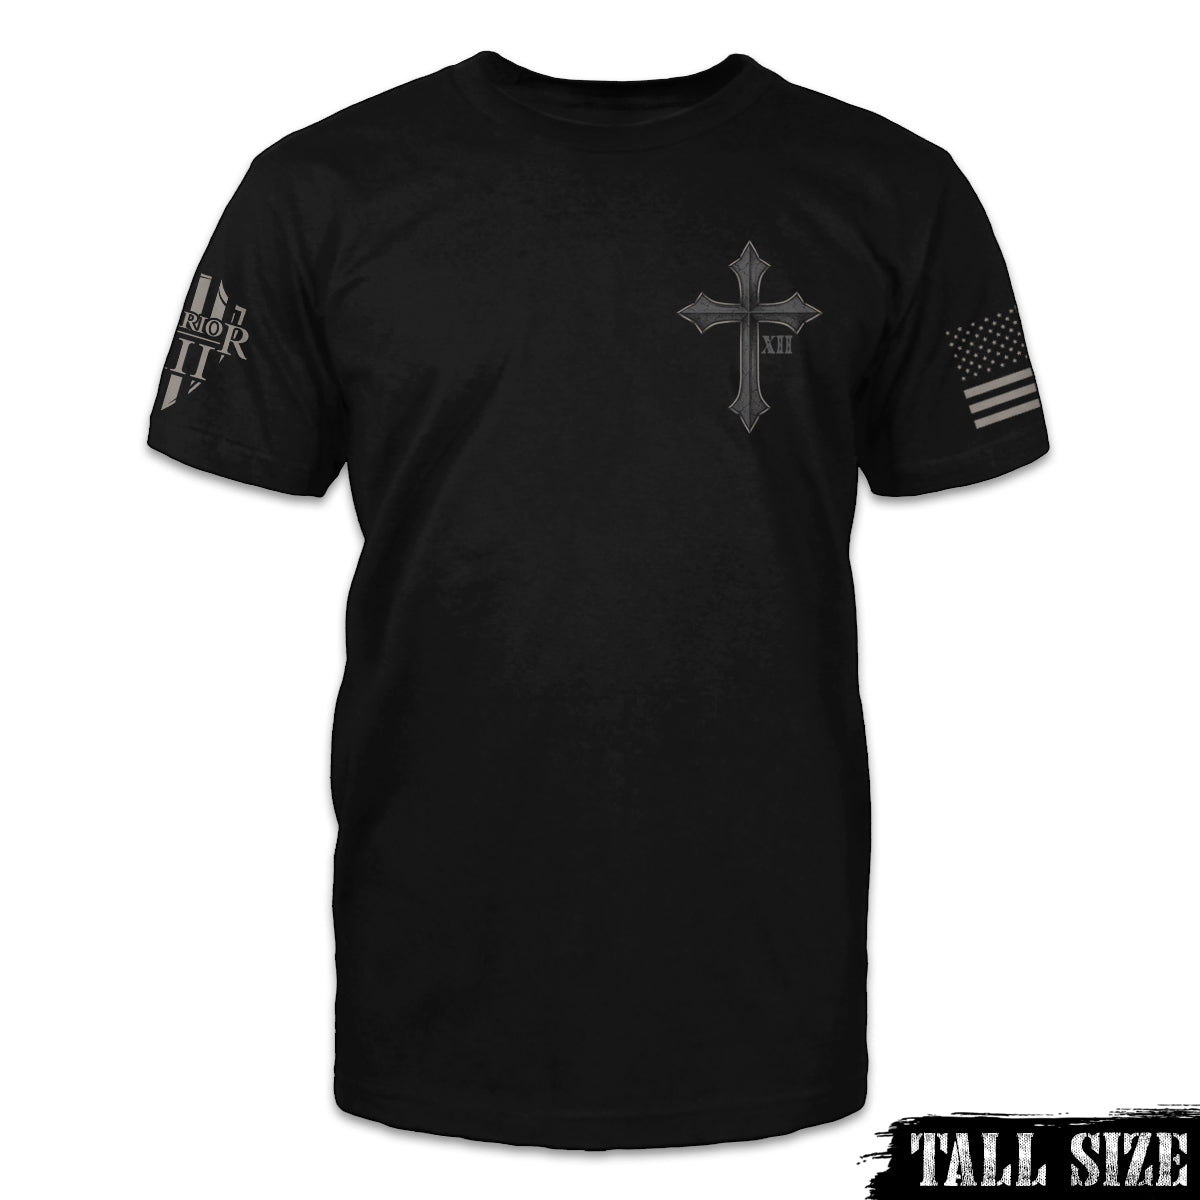 A black tall size shirt with a cross with XII printed on the front.